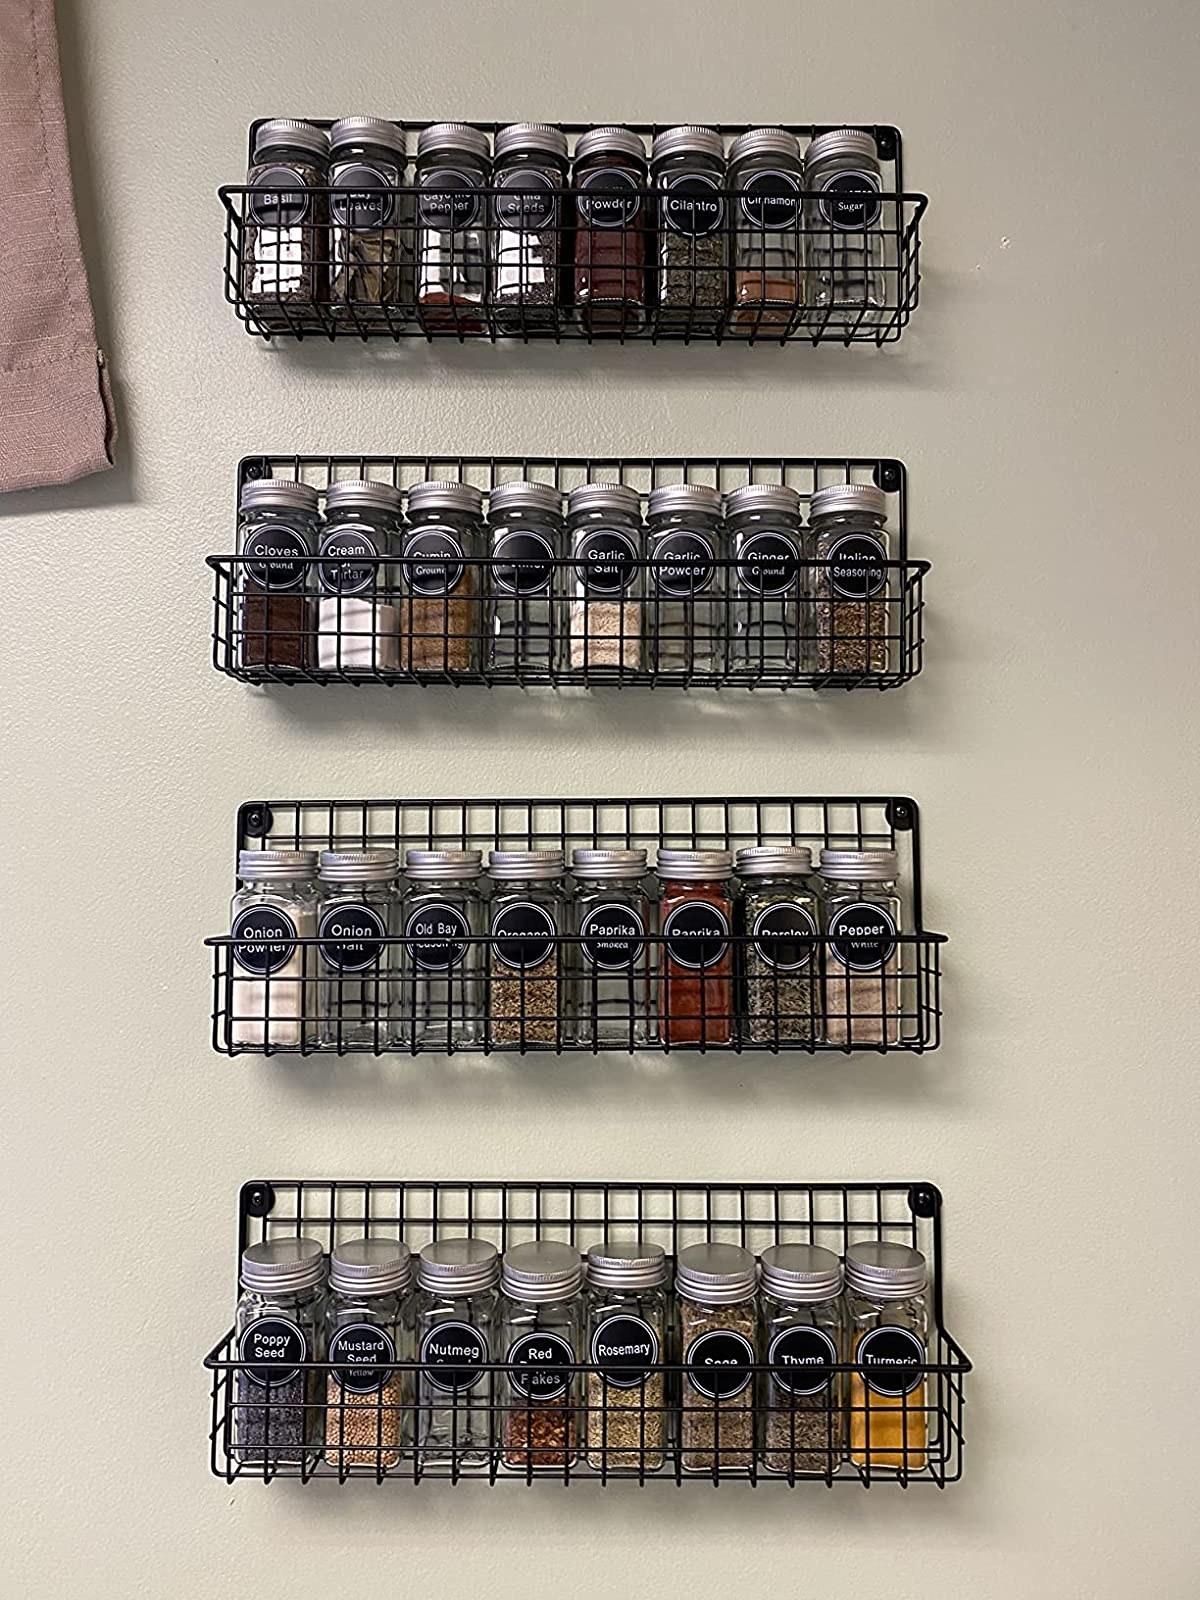 Reviewer image of four wire shelves filled with spice bottles